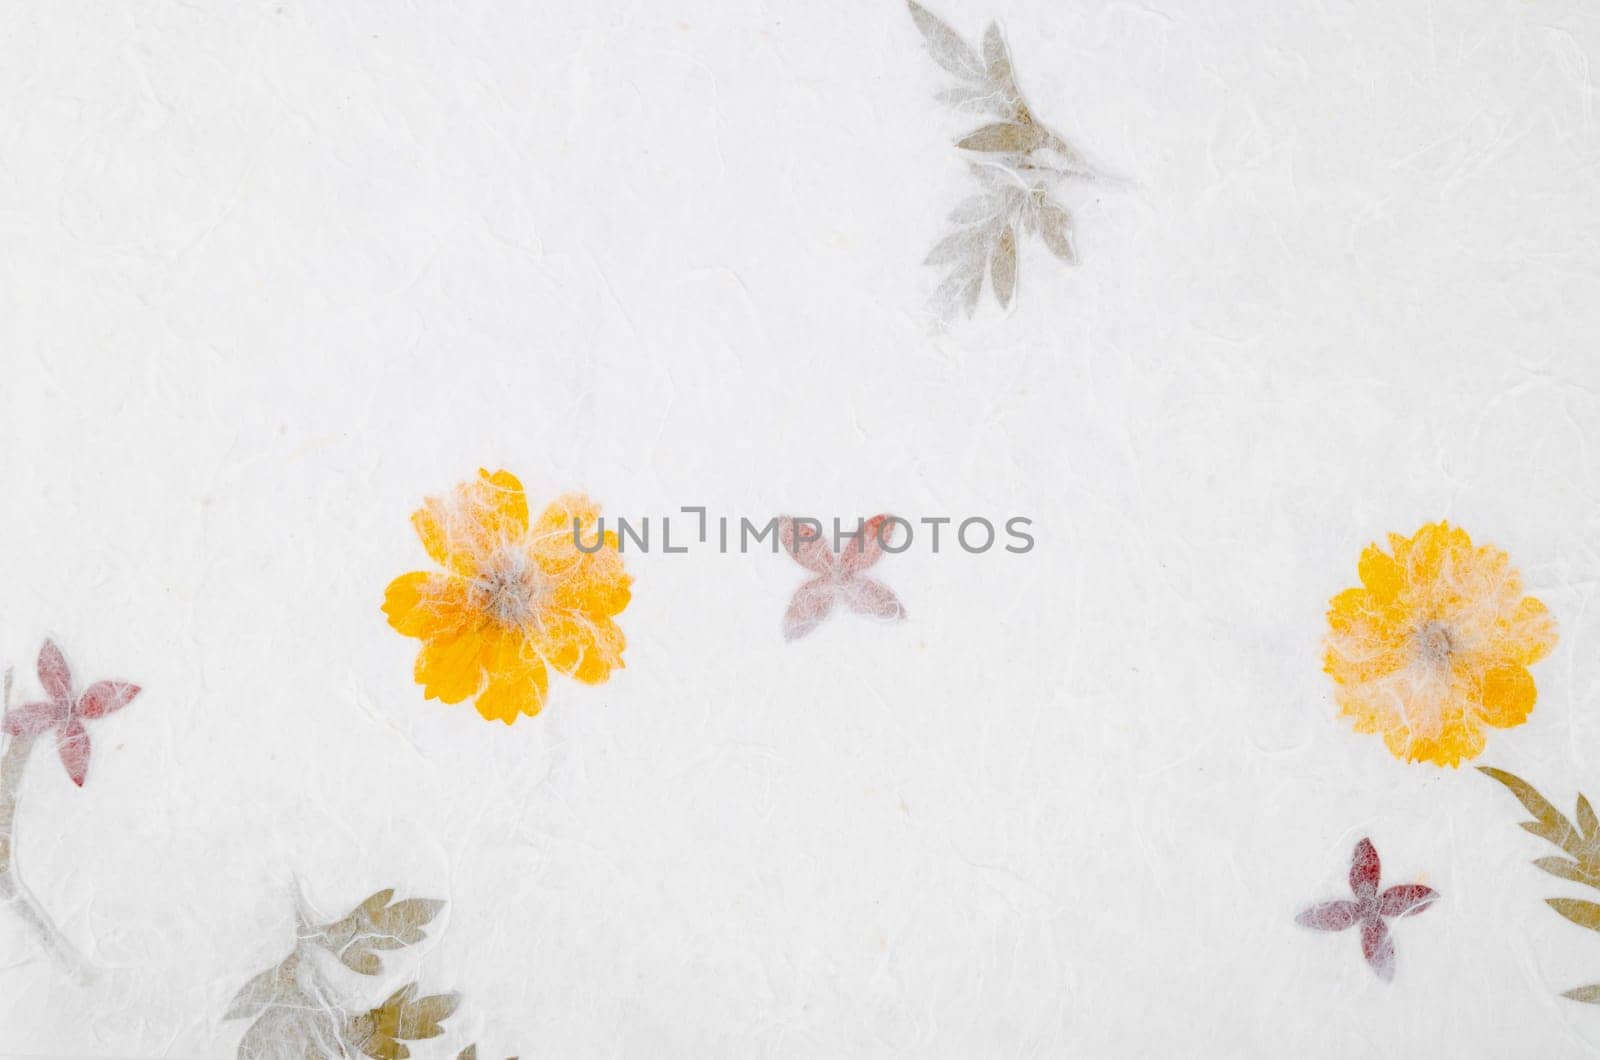 The Handmade recycled flower and leaf paper or Mulberry paper texture as background. by Gamjai